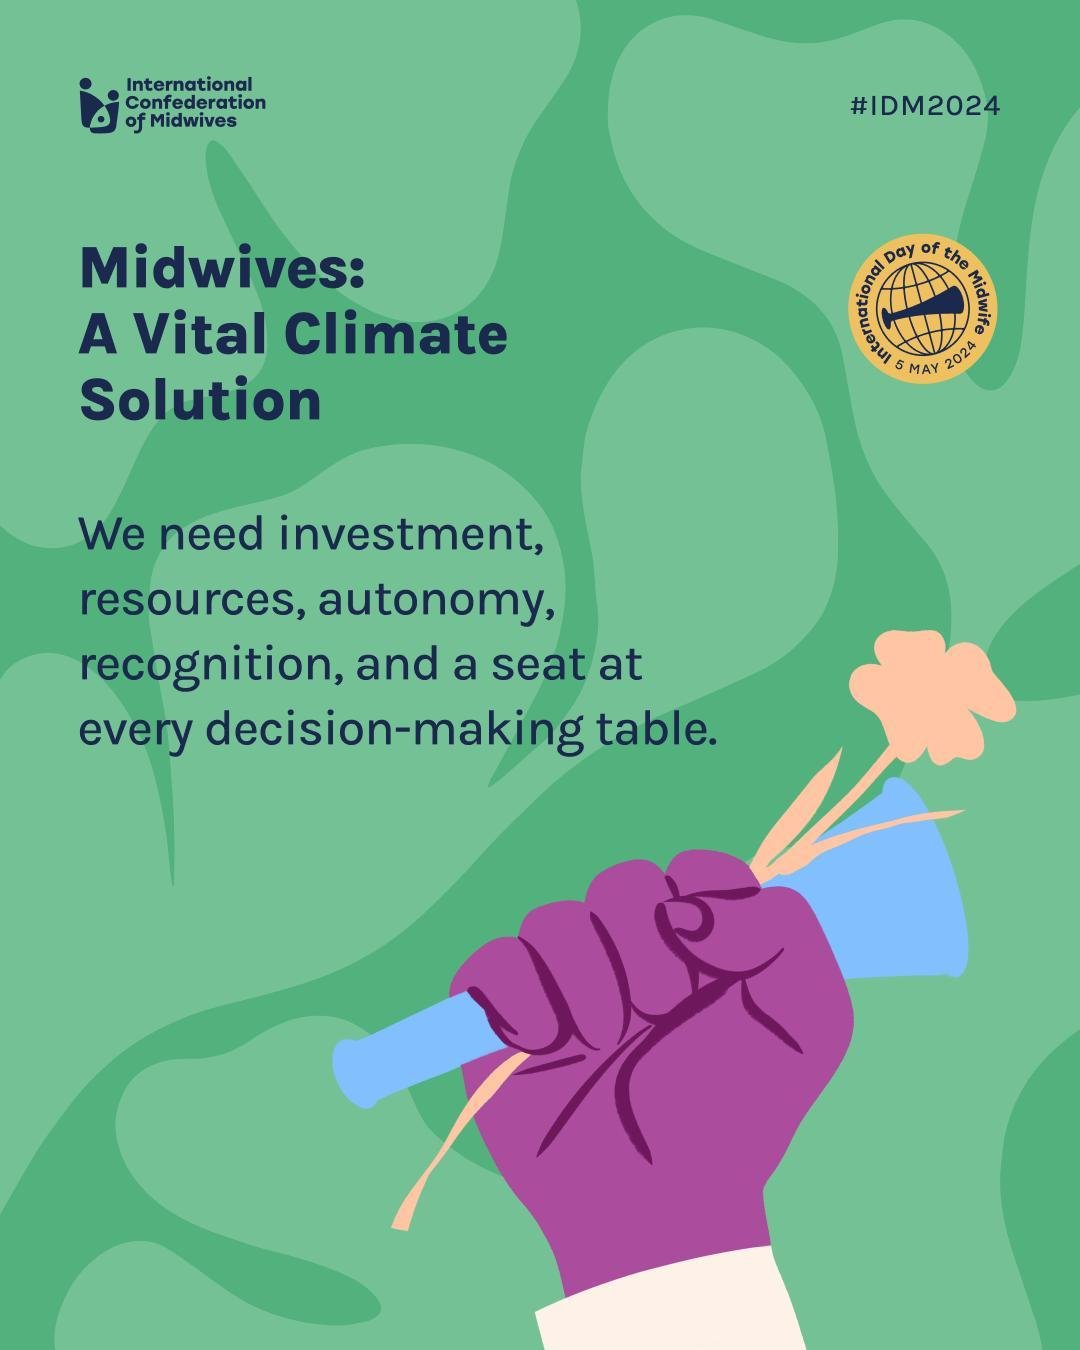 Midwives deliver environmentally sustainable health services and play a key role in making health systems more climate resilient. 🌍💪

During climate crises, midwives can adapt to ensure safe, respectful, and quality care for women and gender divers